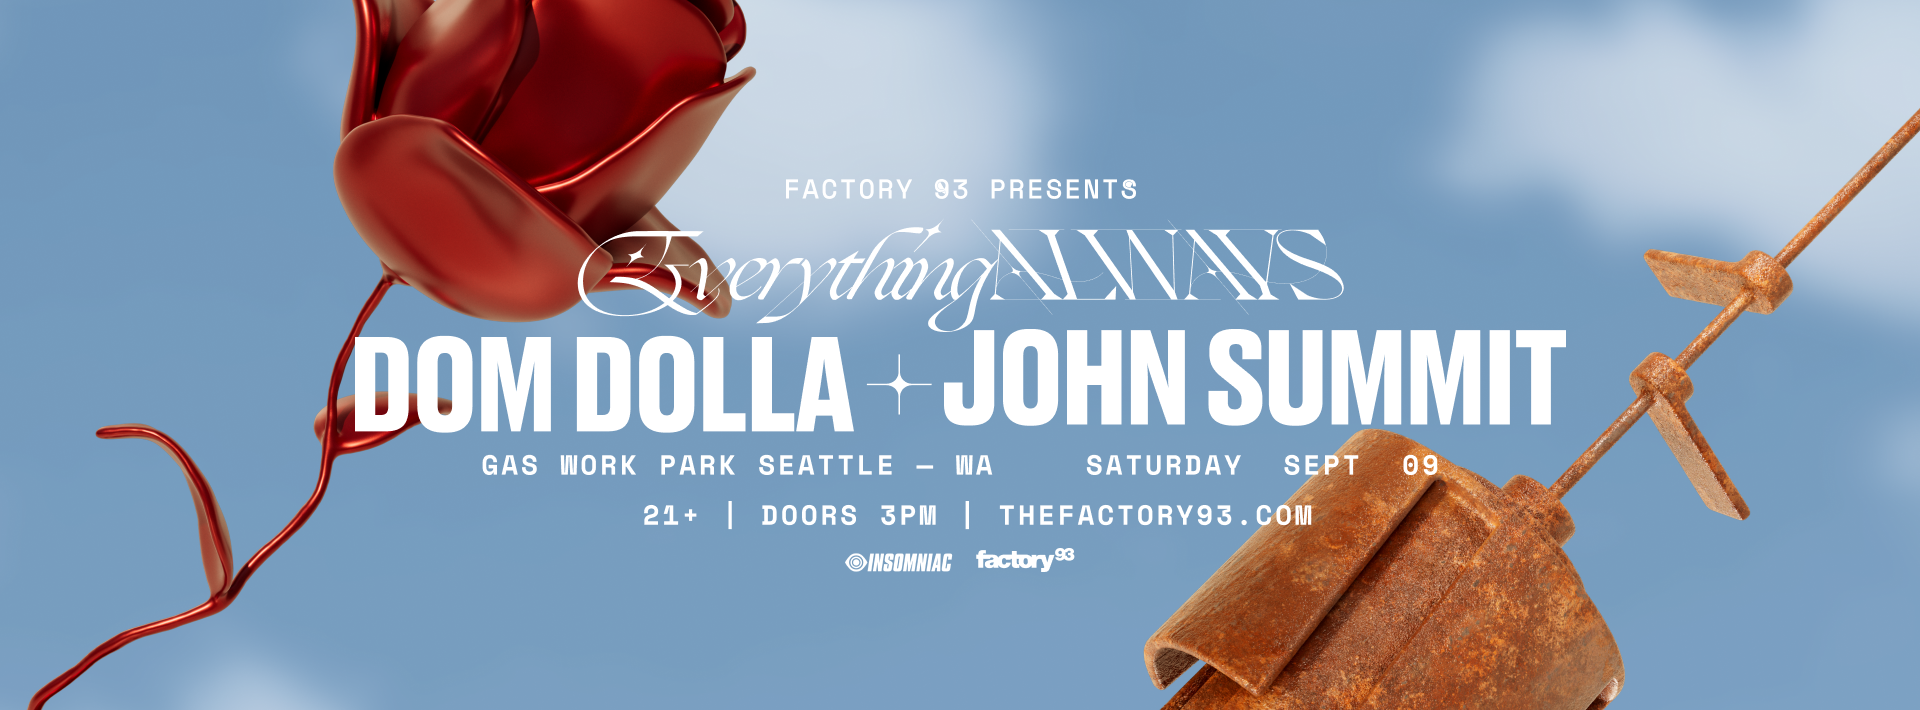 Everything Always with Dom Dolla & John Summit at Gas Works Park